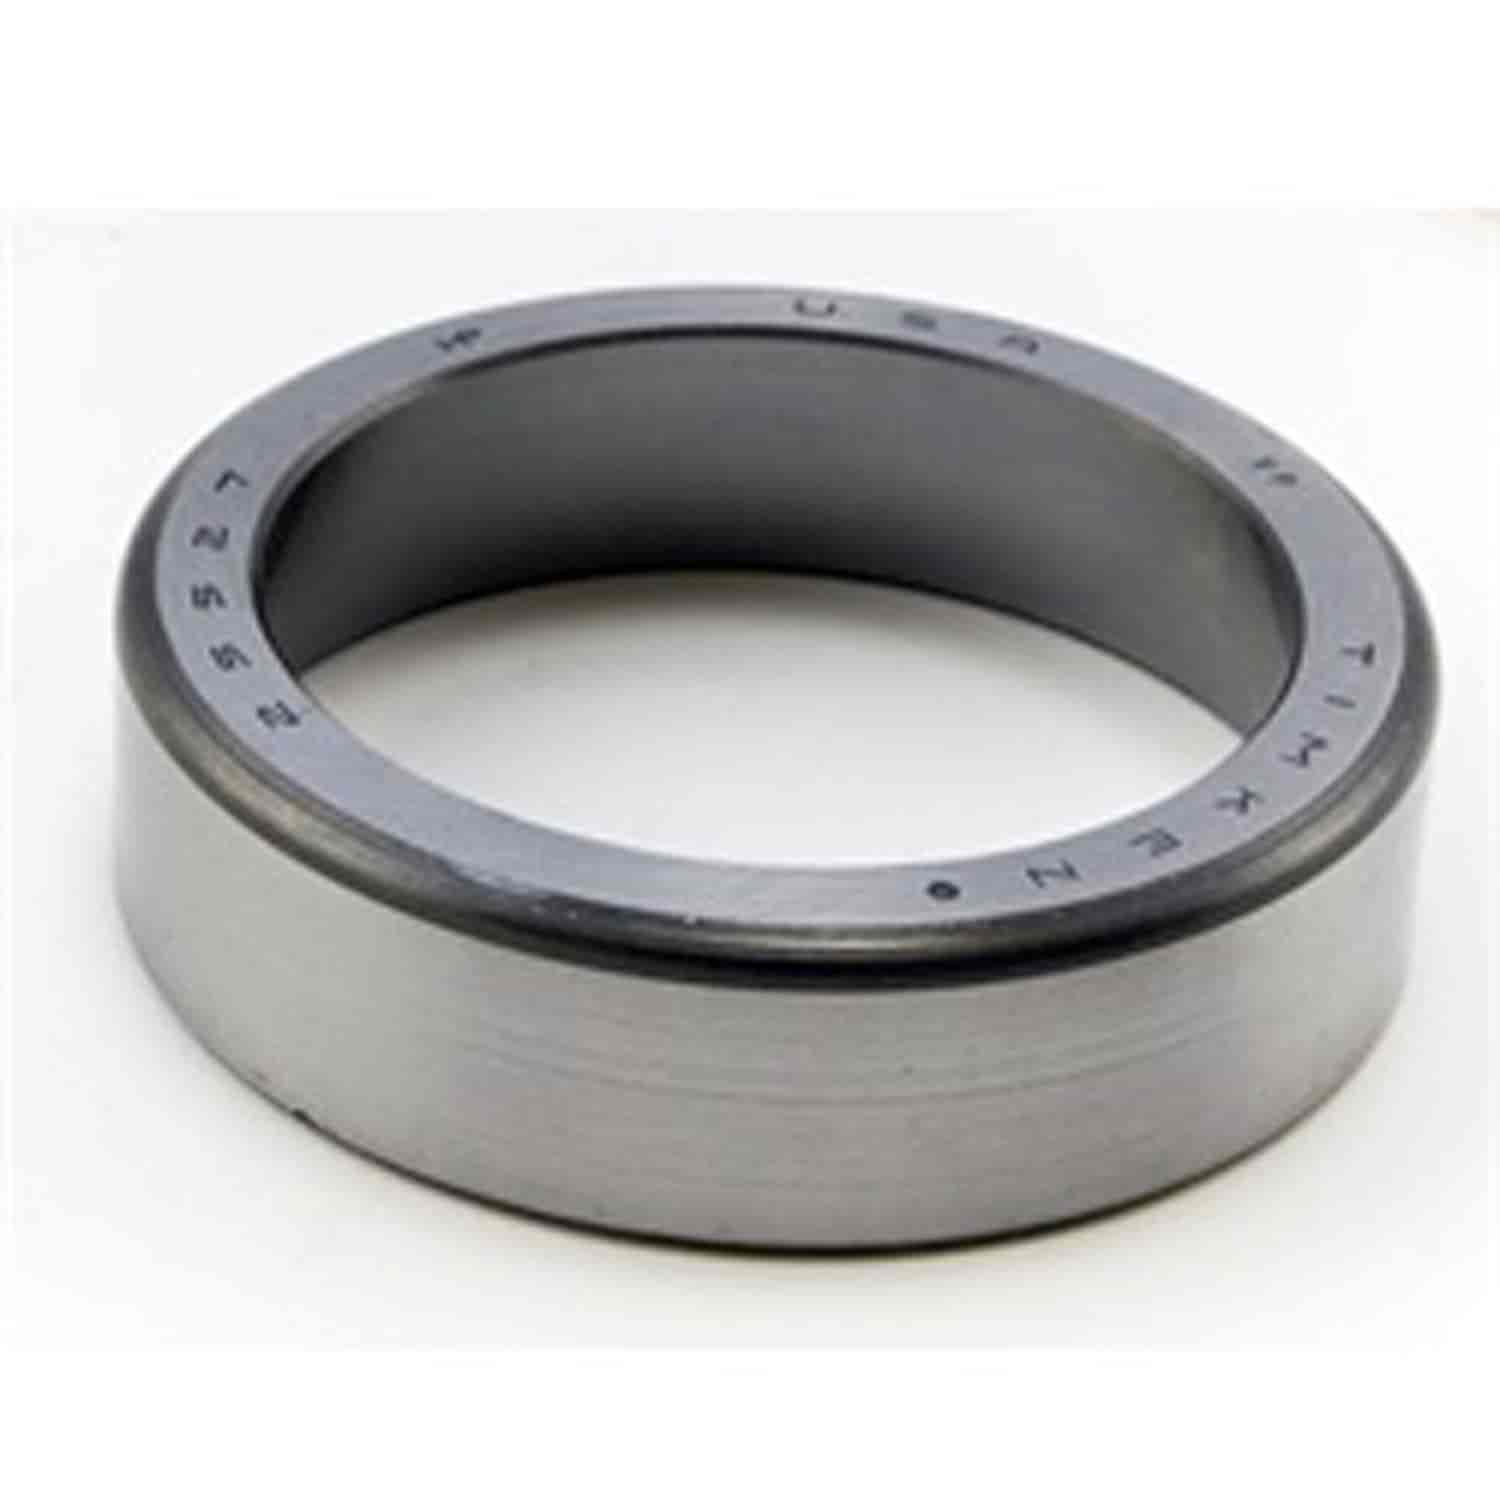 This differential carrier bearing race from Omix-ADA fits the Dana 53 rear axle in 47-65 Willys trucks.